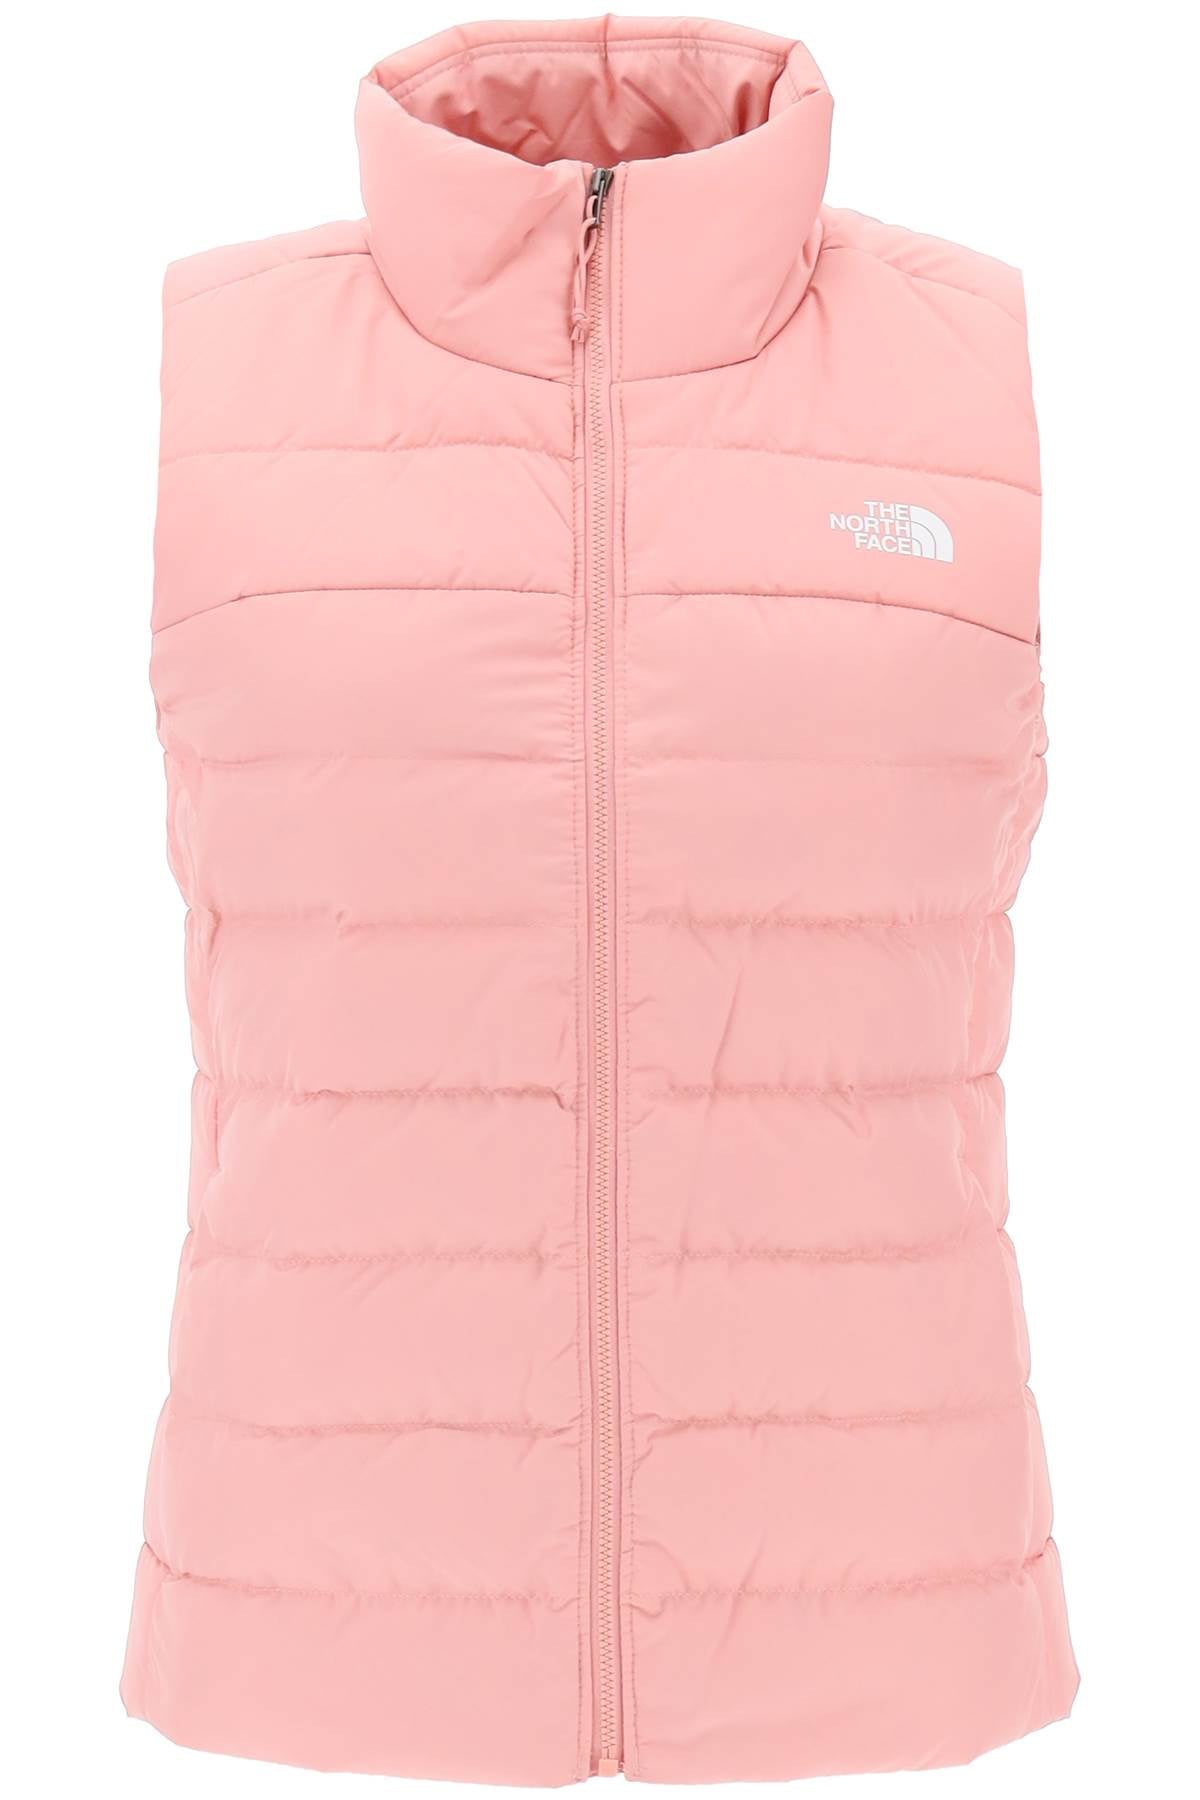 The north face akoncagua lightweight puffer vest-0